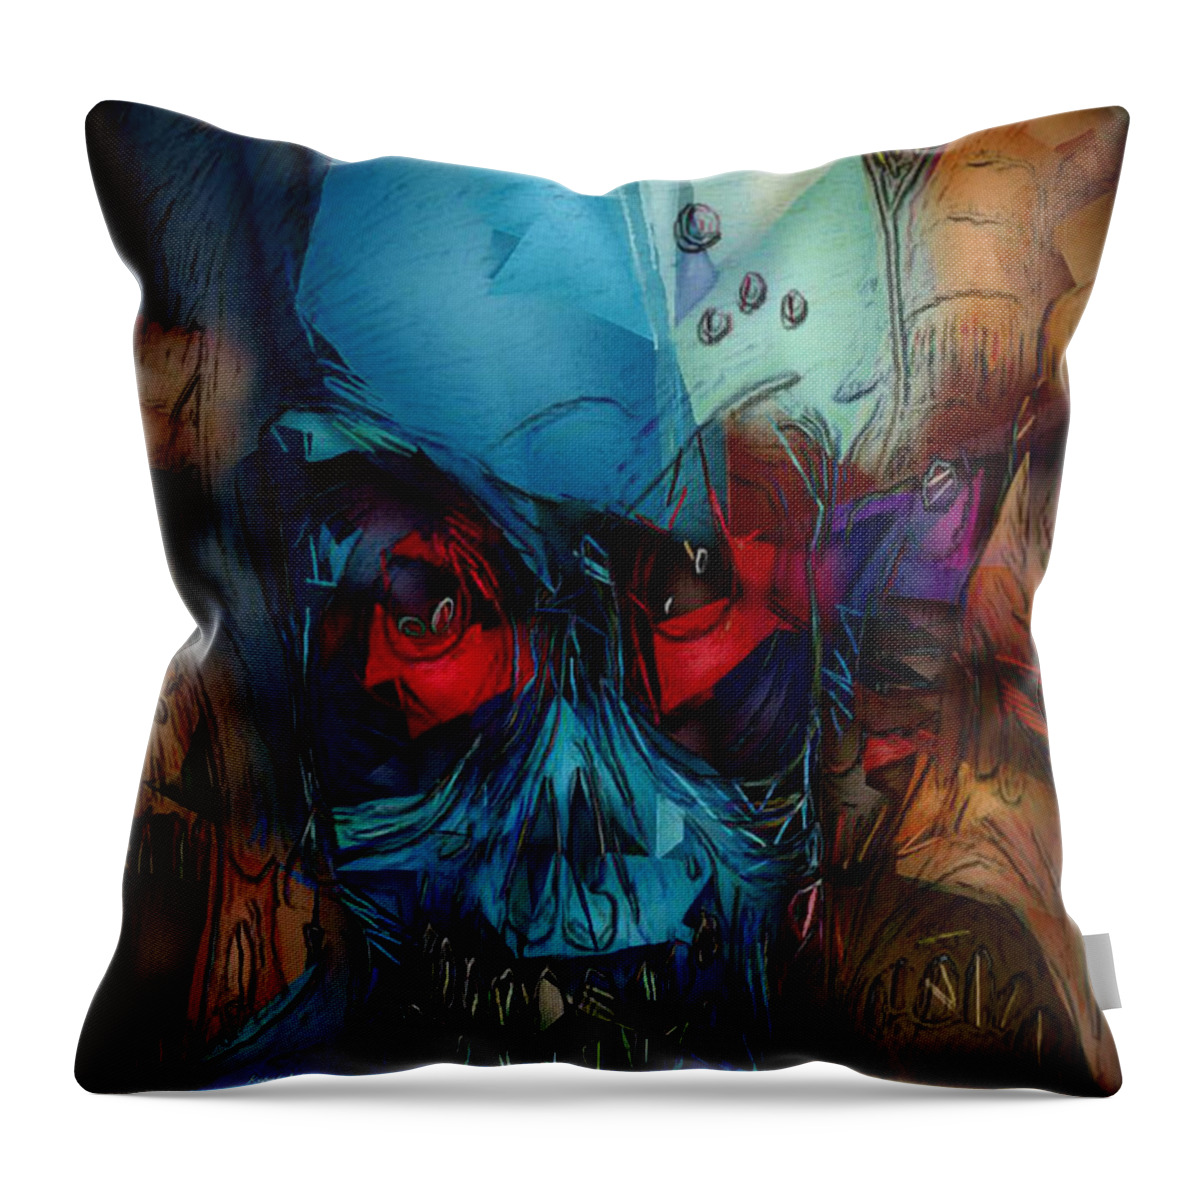 Abstract Throw Pillow featuring the digital art Red Eyes #1 by Rafael Salazar